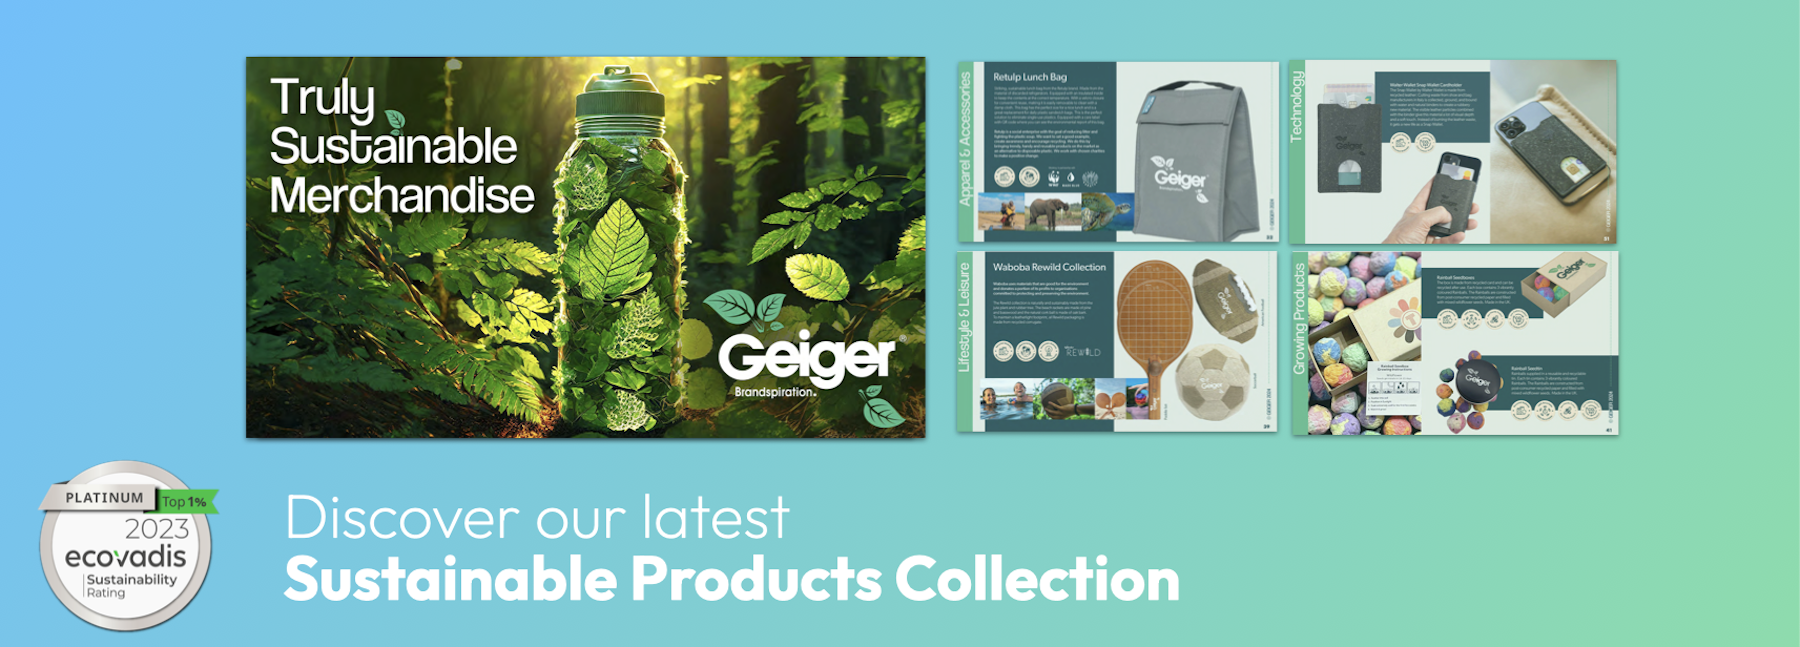 sustainable product ideas from geiger promotional products 